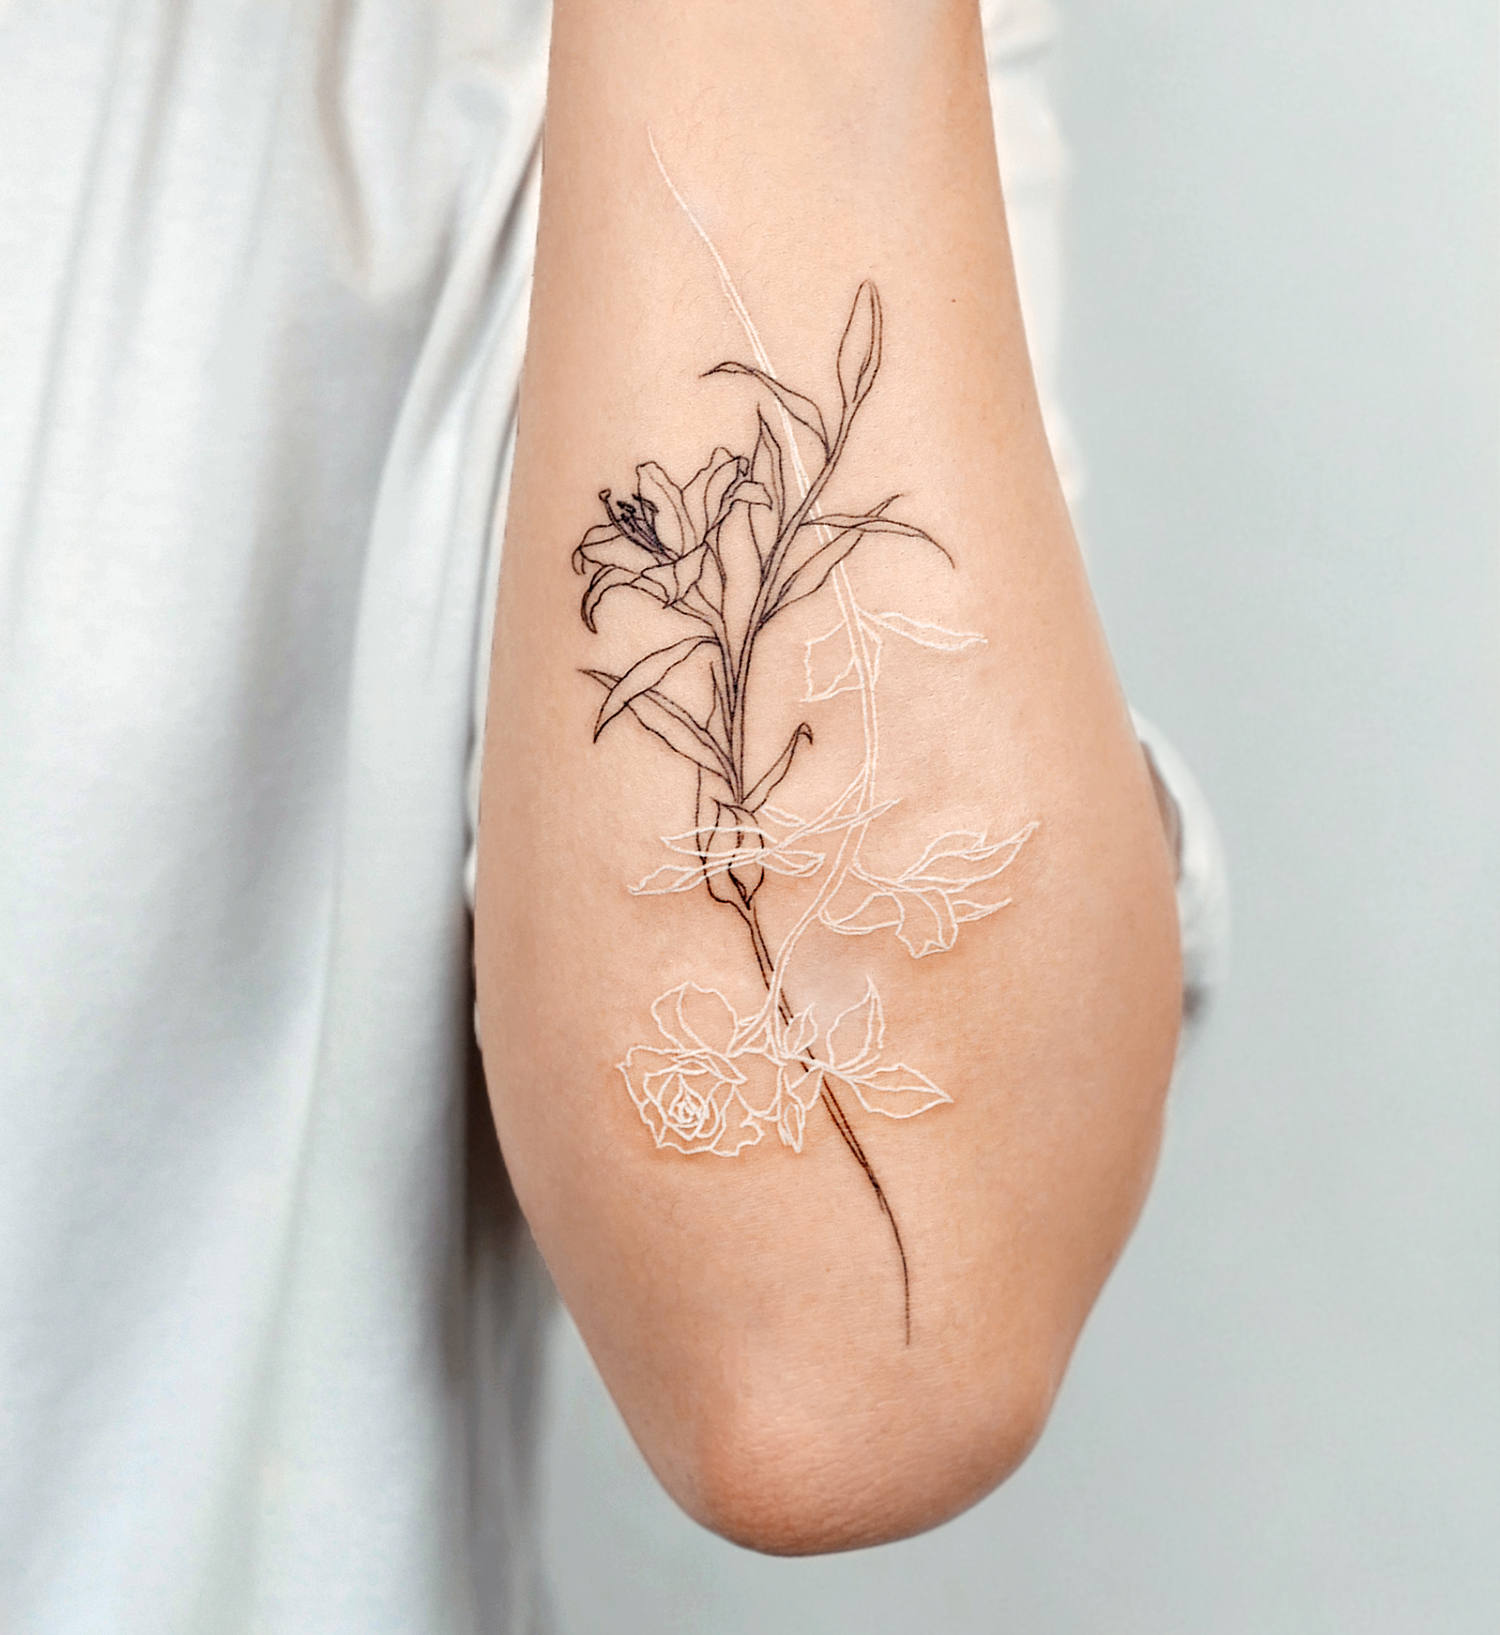 Although this tattoo is fresh, white ink heals differently than other inks